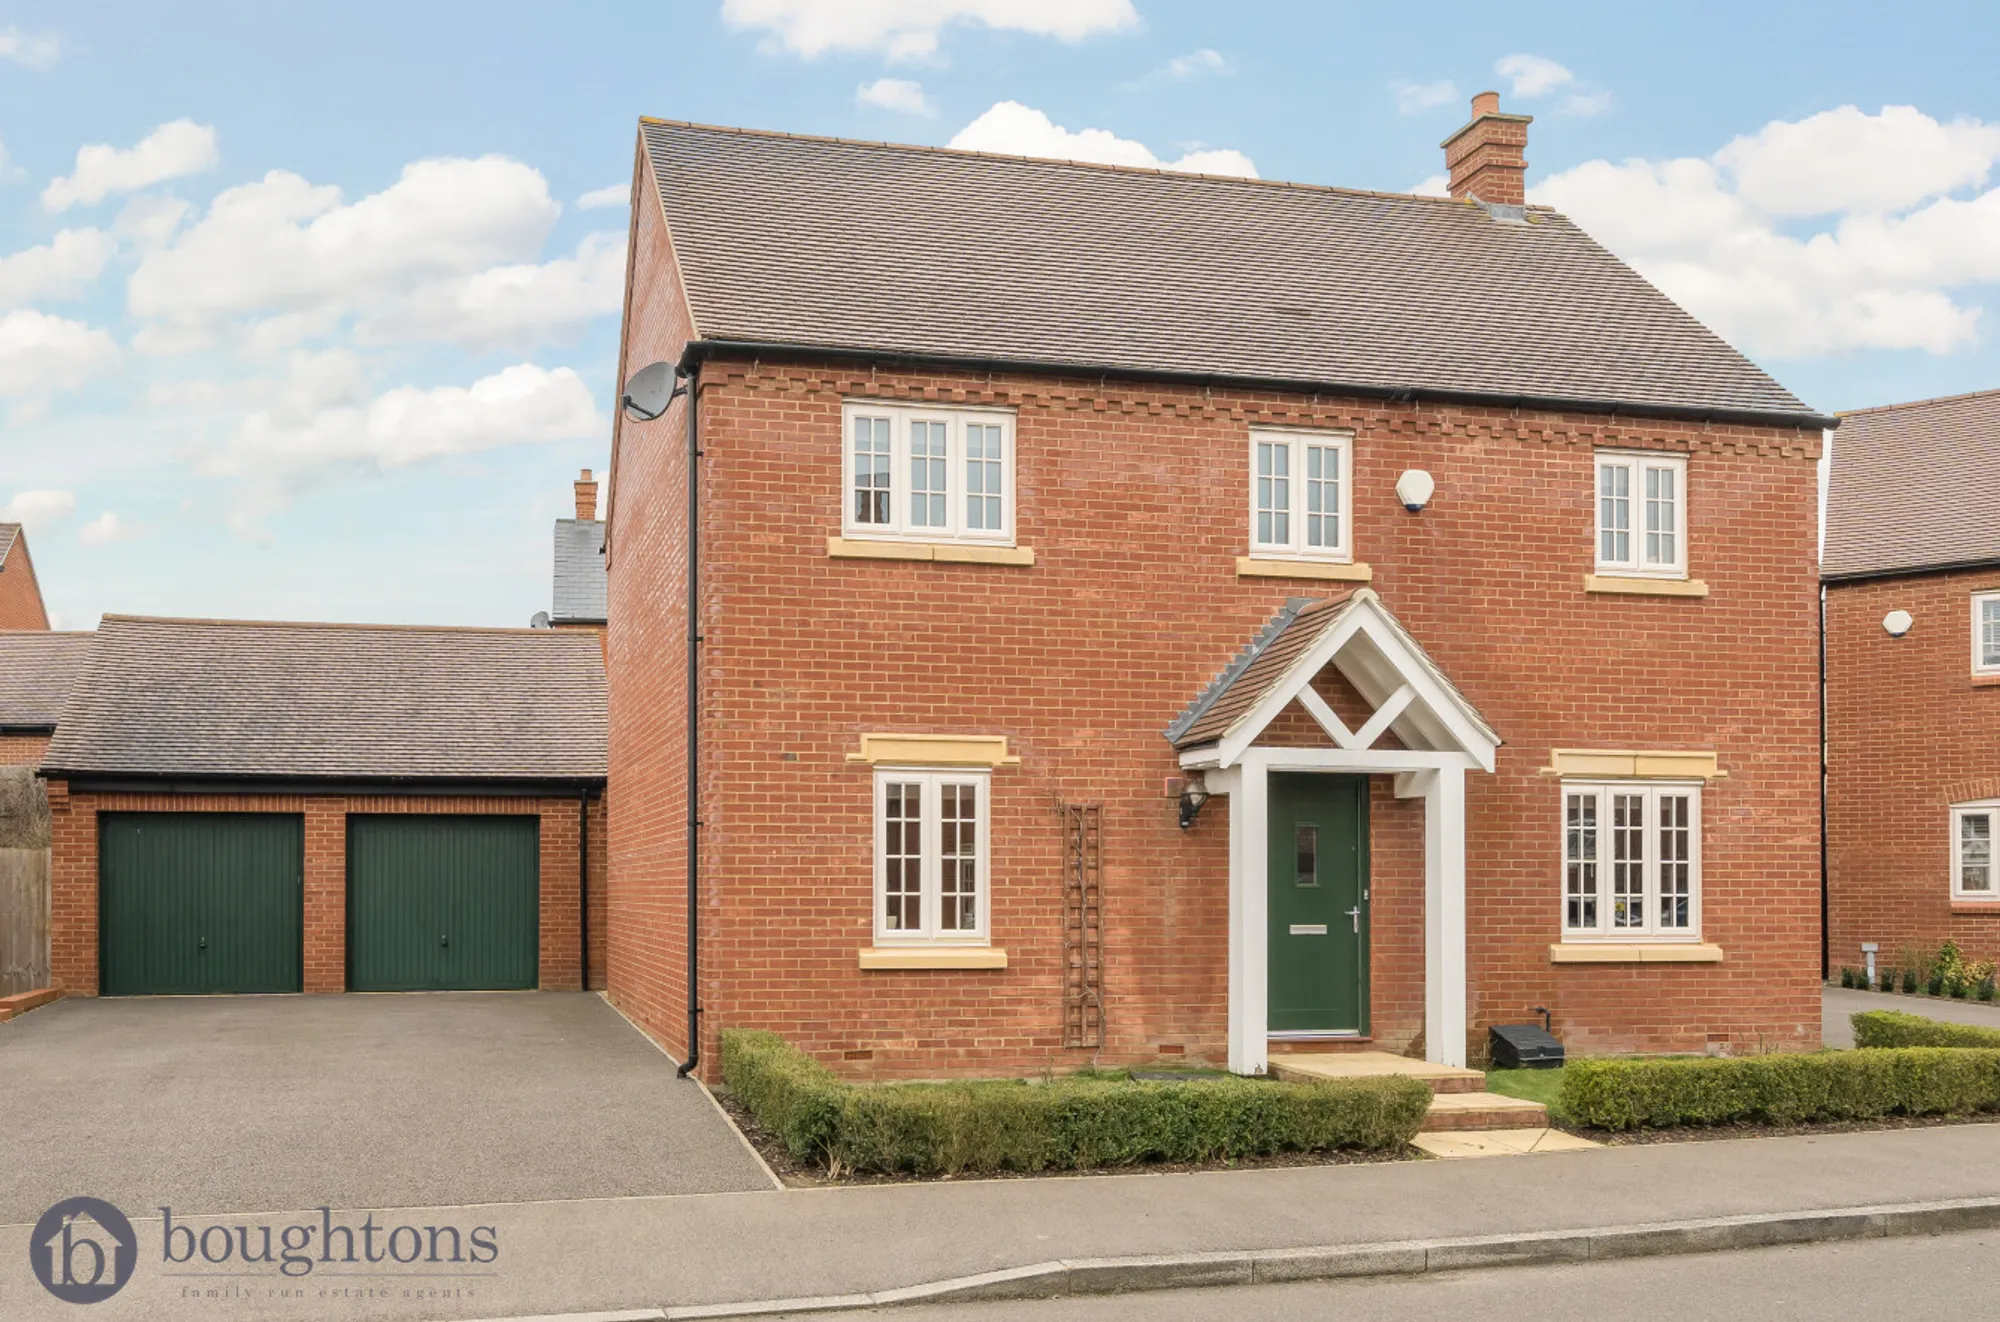 4 bed detached house for sale in Delorean Way, Brackley - Property Image 1